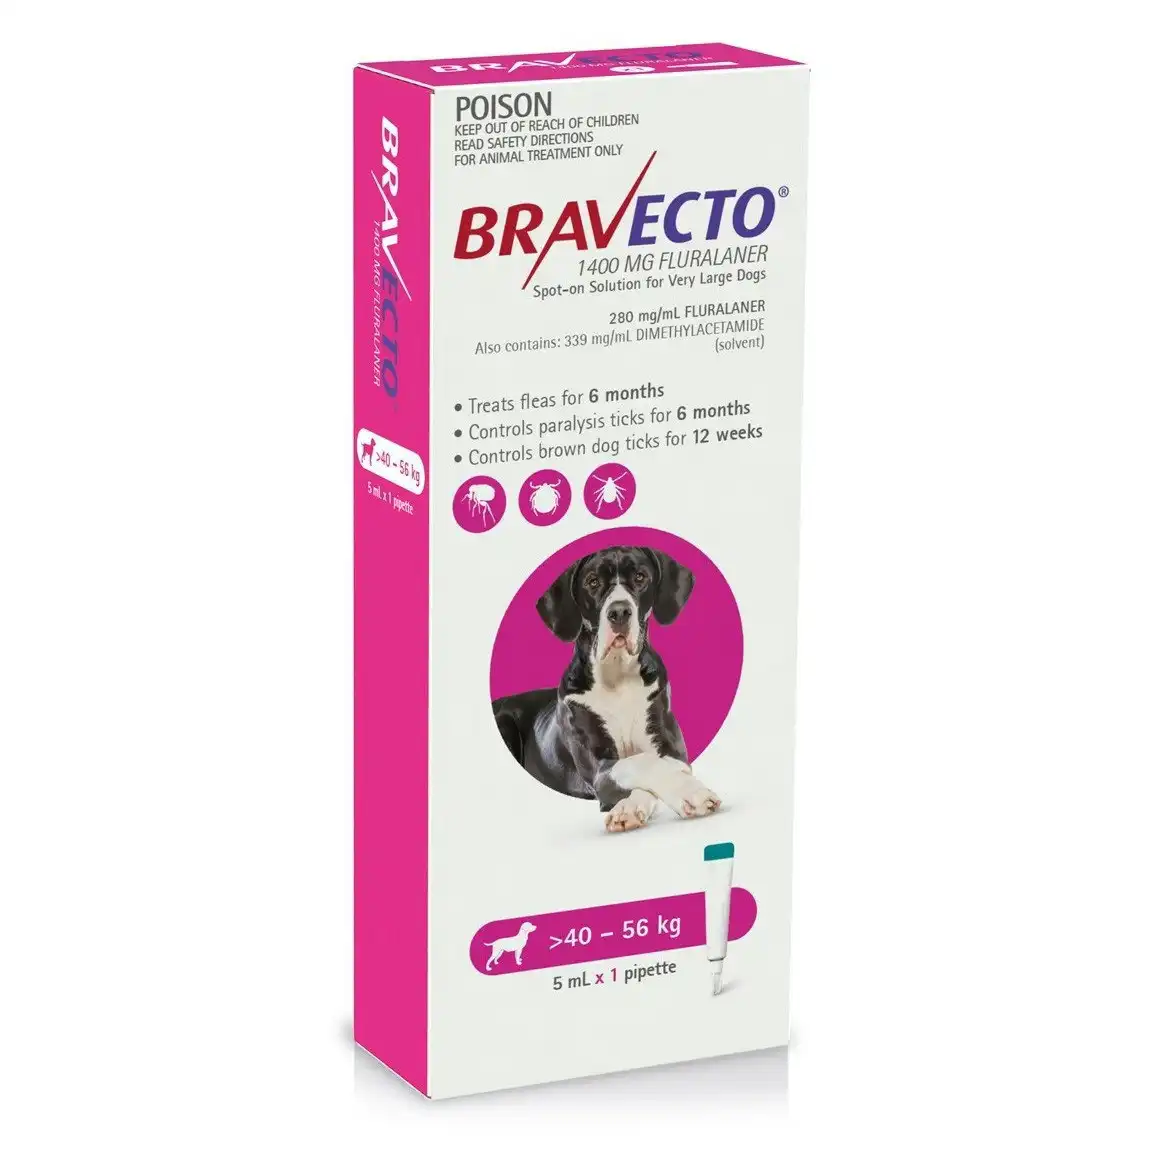 Bravecto Spot On For Very Large Dogs 40 - 56kg (1 Pipette)